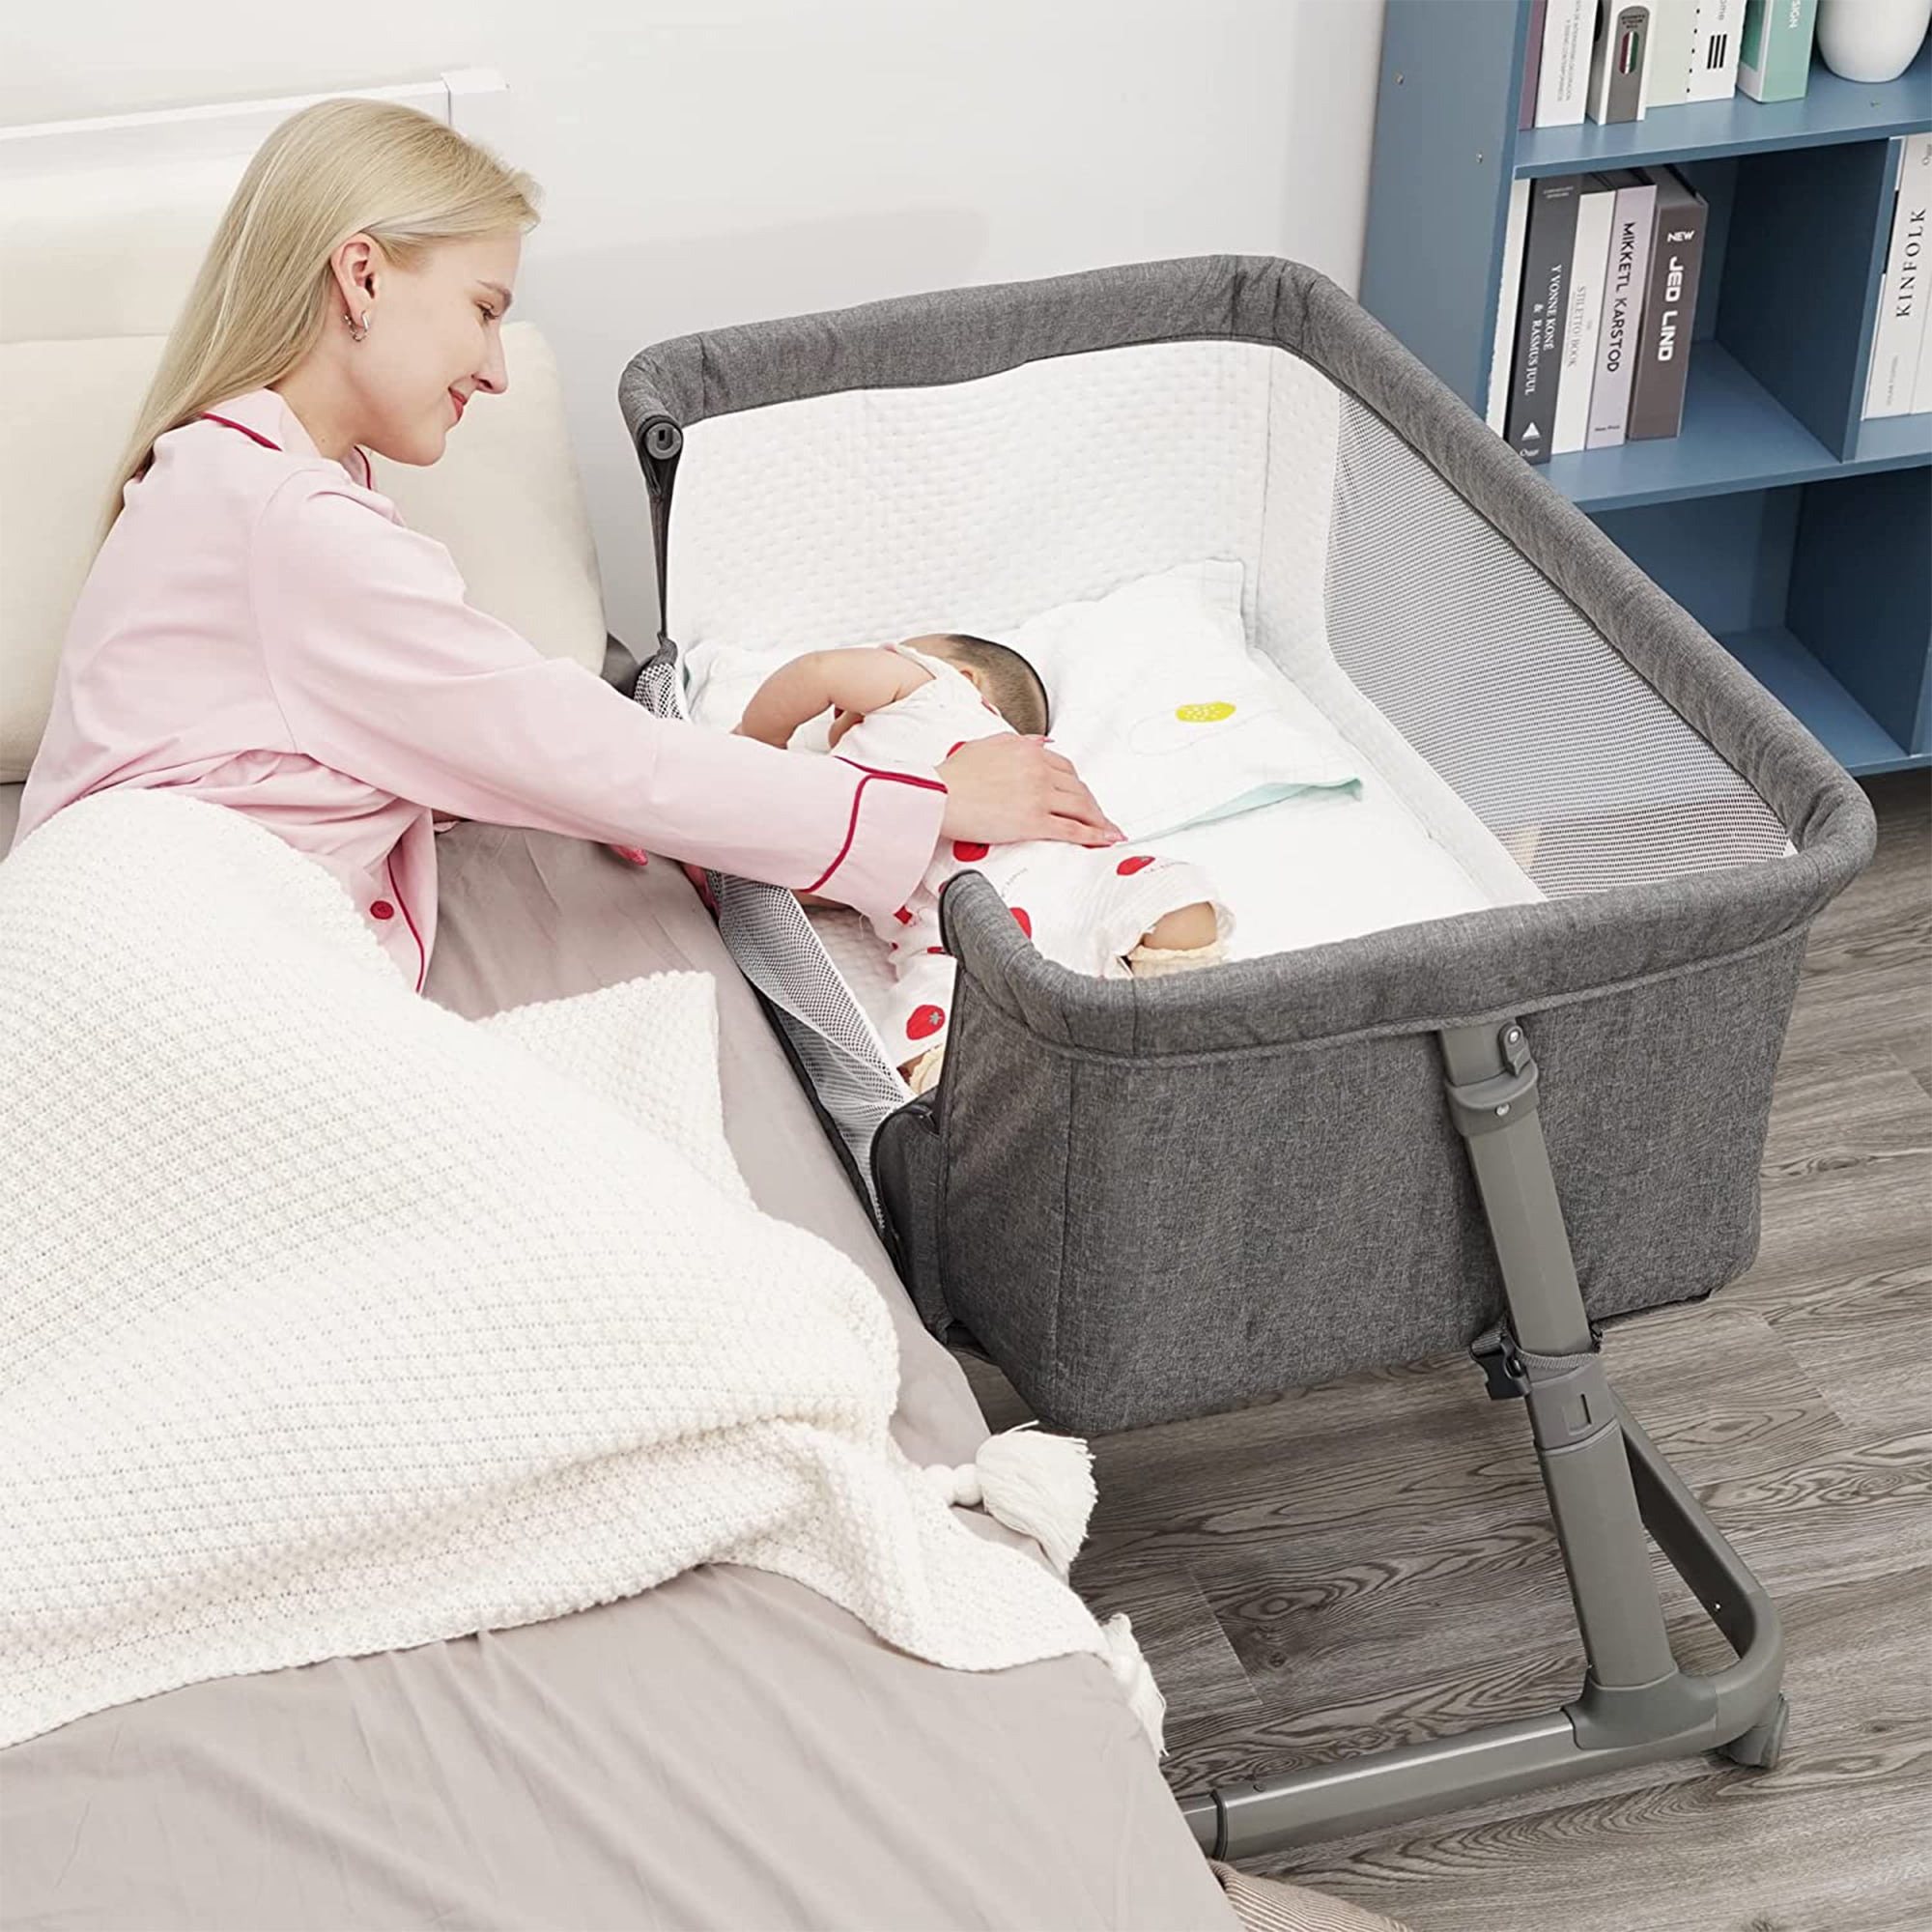 Pamo Babe Unisex Infant Flat Bedside Sleeper Bassinet with Wheels and Floding Frame For 0-9 months (Grey) -